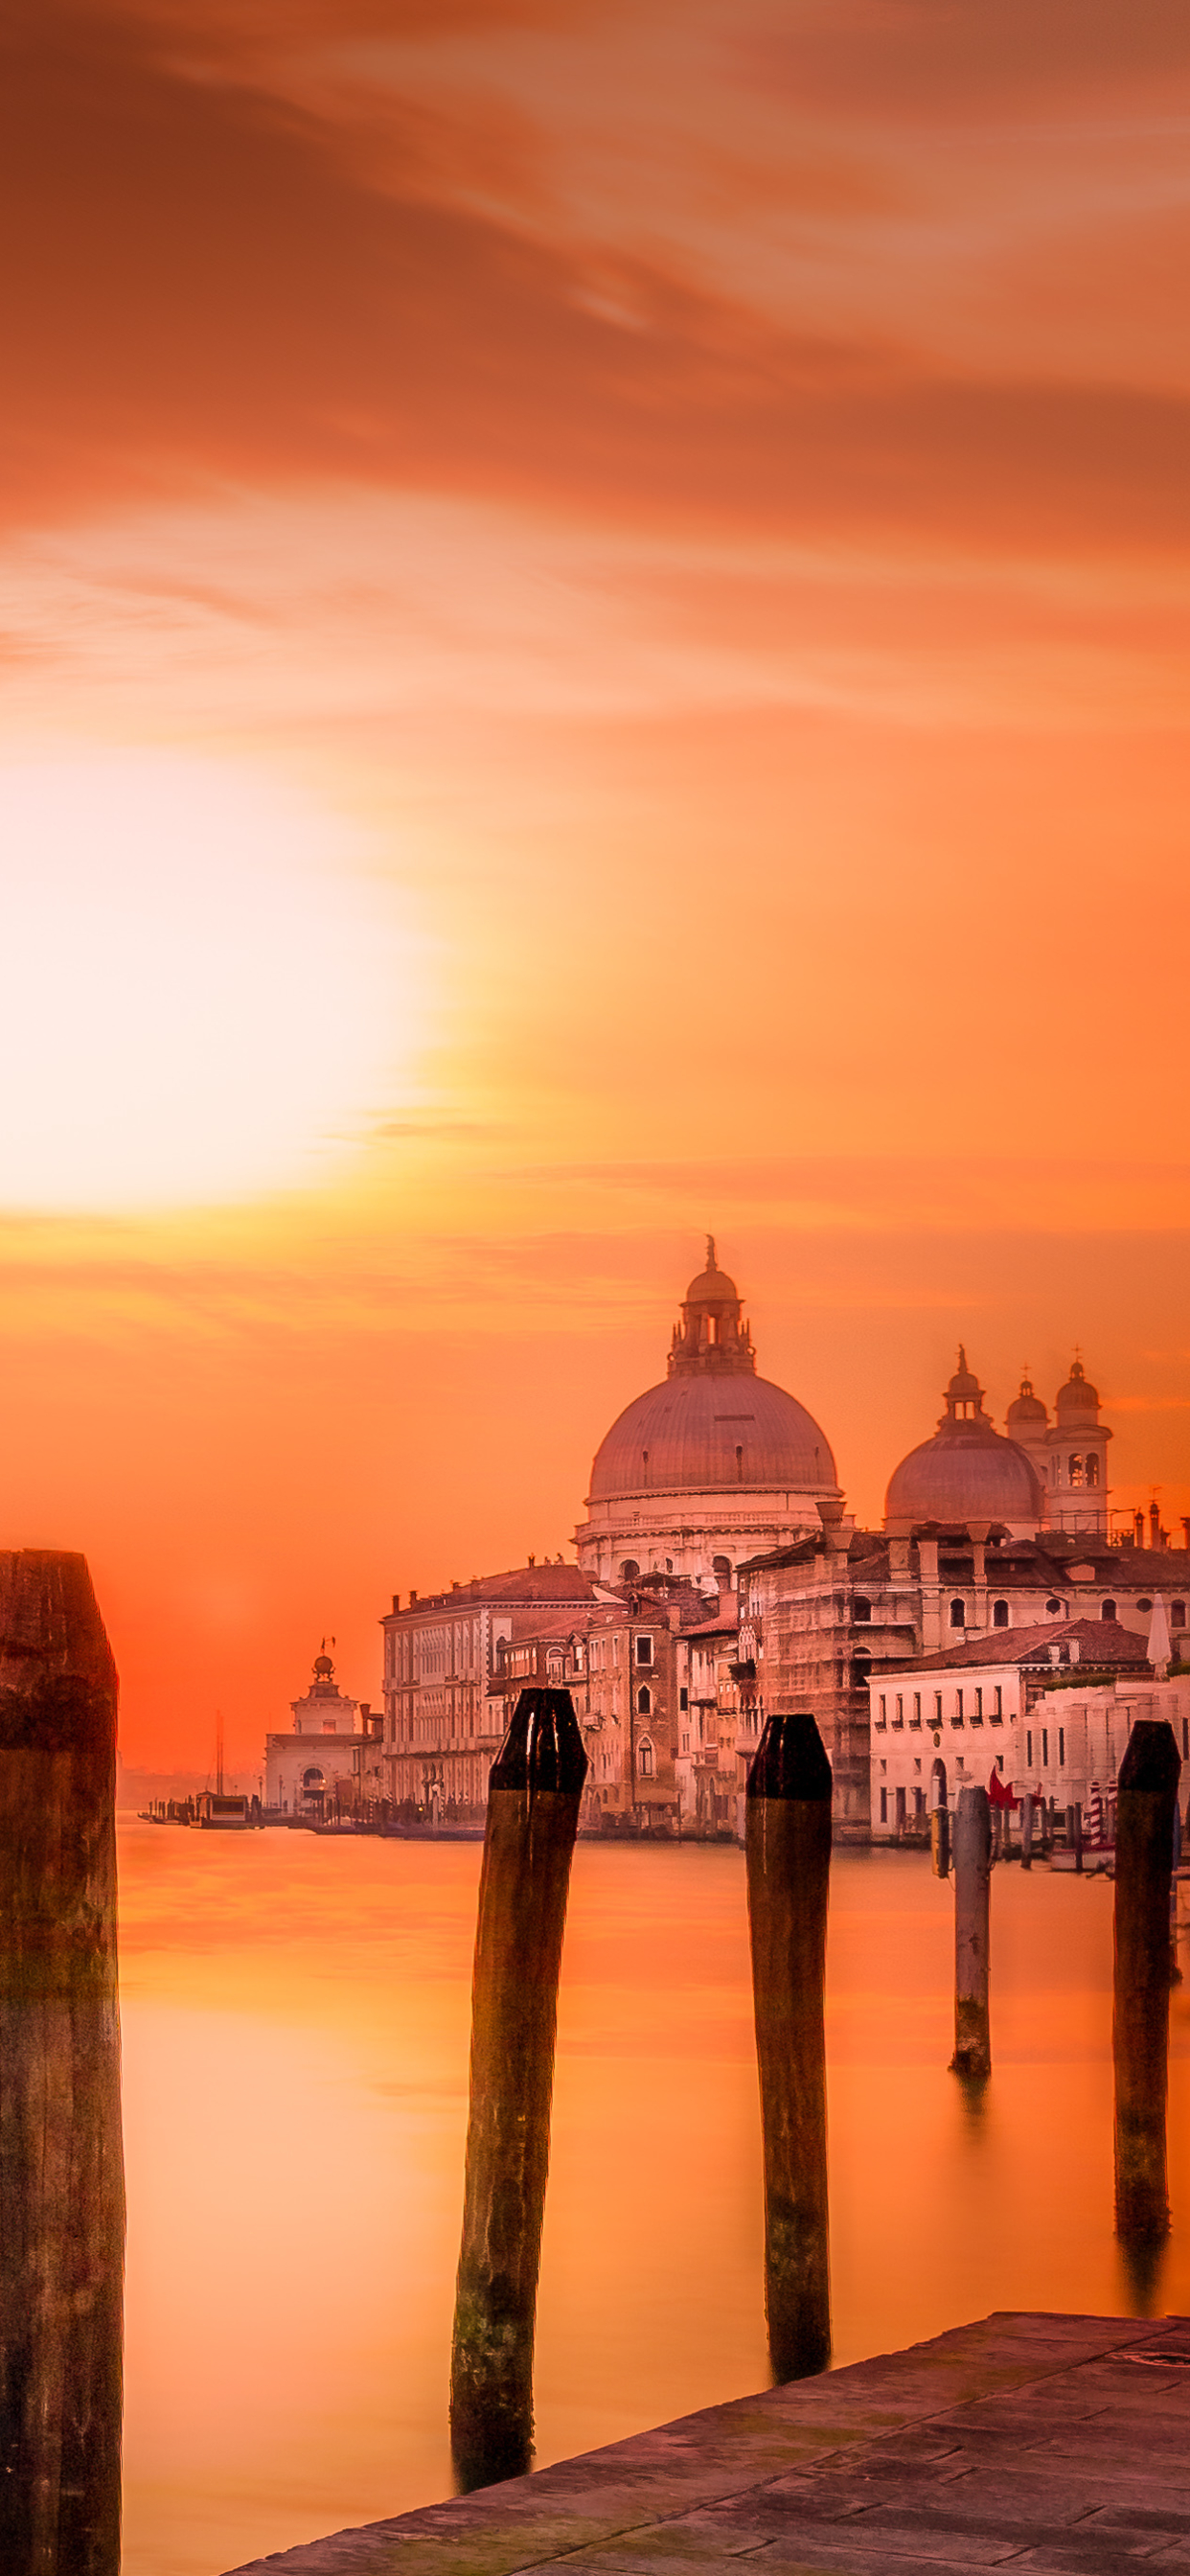 Grand Canal in Venice, Italy at Sunset